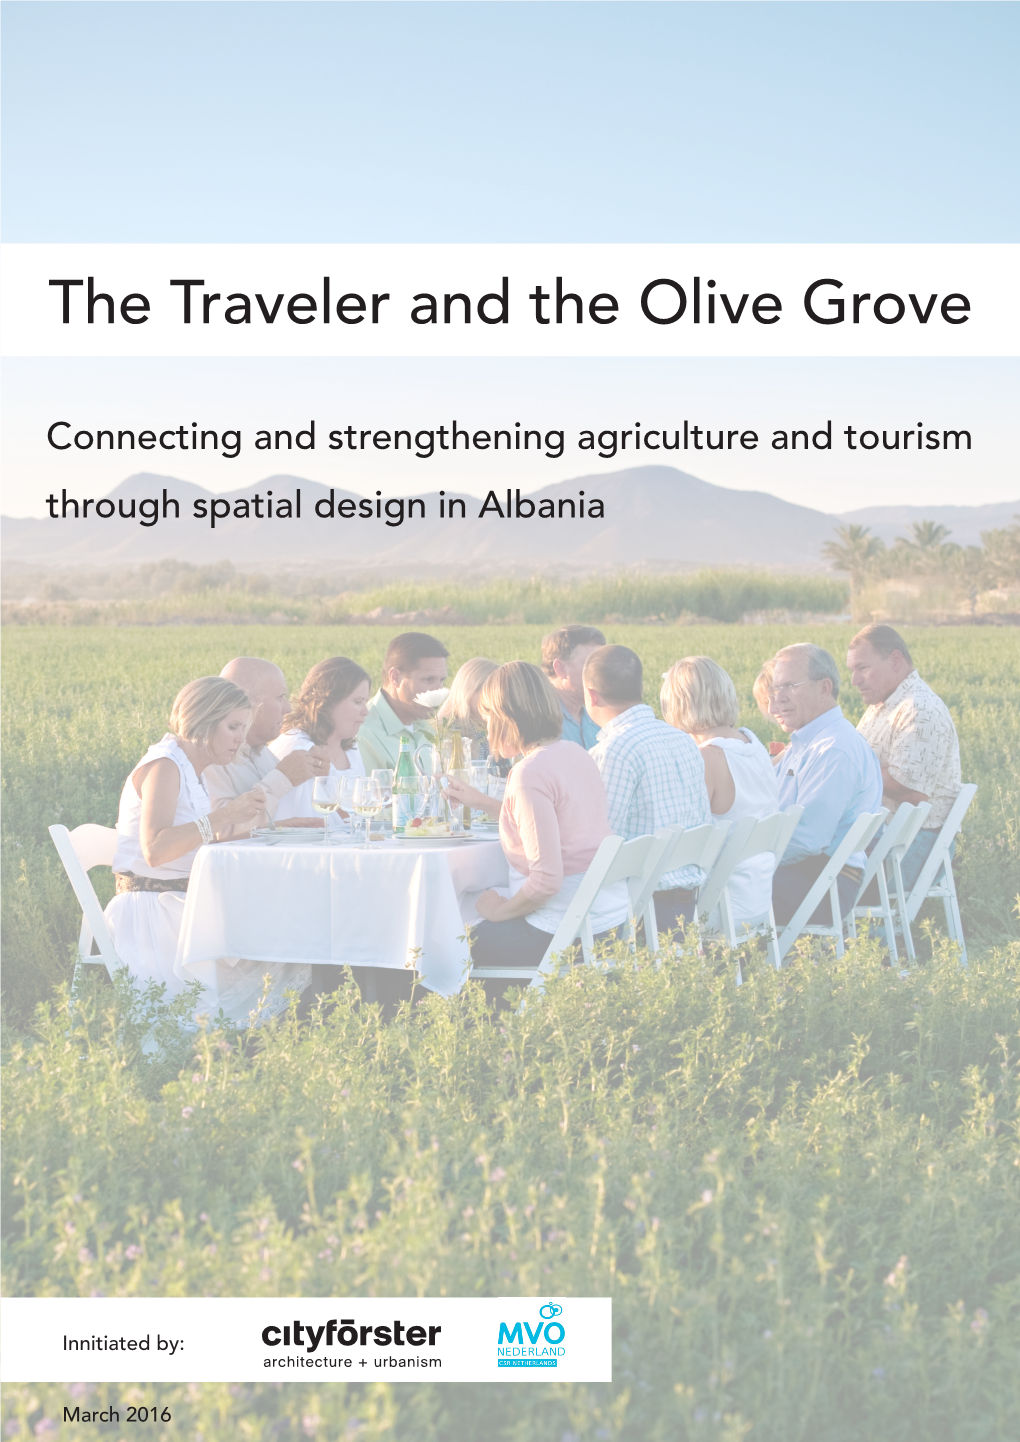 The Traveler and the Olive Grove